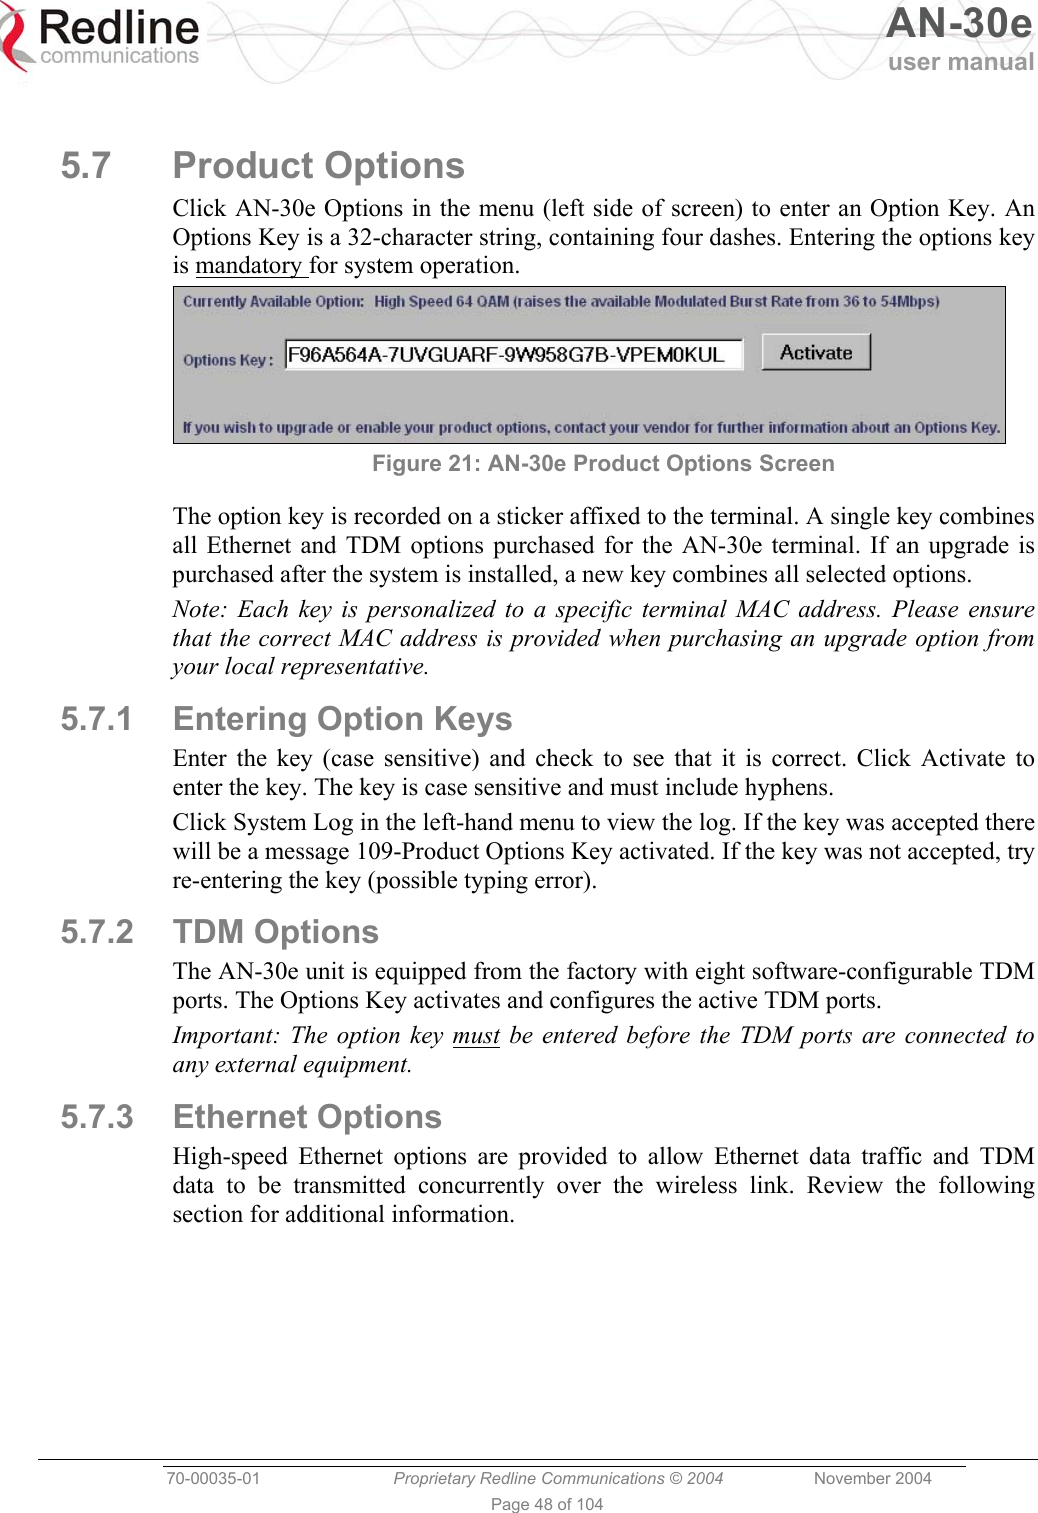   AN-30e user manual  70-00035-01  Proprietary Redline Communications © 2004 November 2004   Page 48 of 104  5.7 Product Options Click AN-30e Options in the menu (left side of screen) to enter an Option Key. An Options Key is a 32-character string, containing four dashes. Entering the options key is mandatory for system operation.  Figure 21: AN-30e Product Options Screen The option key is recorded on a sticker affixed to the terminal. A single key combines all Ethernet and TDM options purchased for the AN-30e terminal. If an upgrade is purchased after the system is installed, a new key combines all selected options.  Note: Each key is personalized to a specific terminal MAC address. Please ensure that the correct MAC address is provided when purchasing an upgrade option from your local representative. 5.7.1  Entering Option Keys Enter the key (case sensitive) and check to see that it is correct. Click Activate to enter the key. The key is case sensitive and must include hyphens. Click System Log in the left-hand menu to view the log. If the key was accepted there will be a message 109-Product Options Key activated. If the key was not accepted, try re-entering the key (possible typing error). 5.7.2 TDM Options The AN-30e unit is equipped from the factory with eight software-configurable TDM ports. The Options Key activates and configures the active TDM ports. Important: The option key must be entered before the TDM ports are connected to any external equipment. 5.7.3 Ethernet Options High-speed Ethernet options are provided to allow Ethernet data traffic and TDM data to be transmitted concurrently over the wireless link. Review the following section for additional information.  